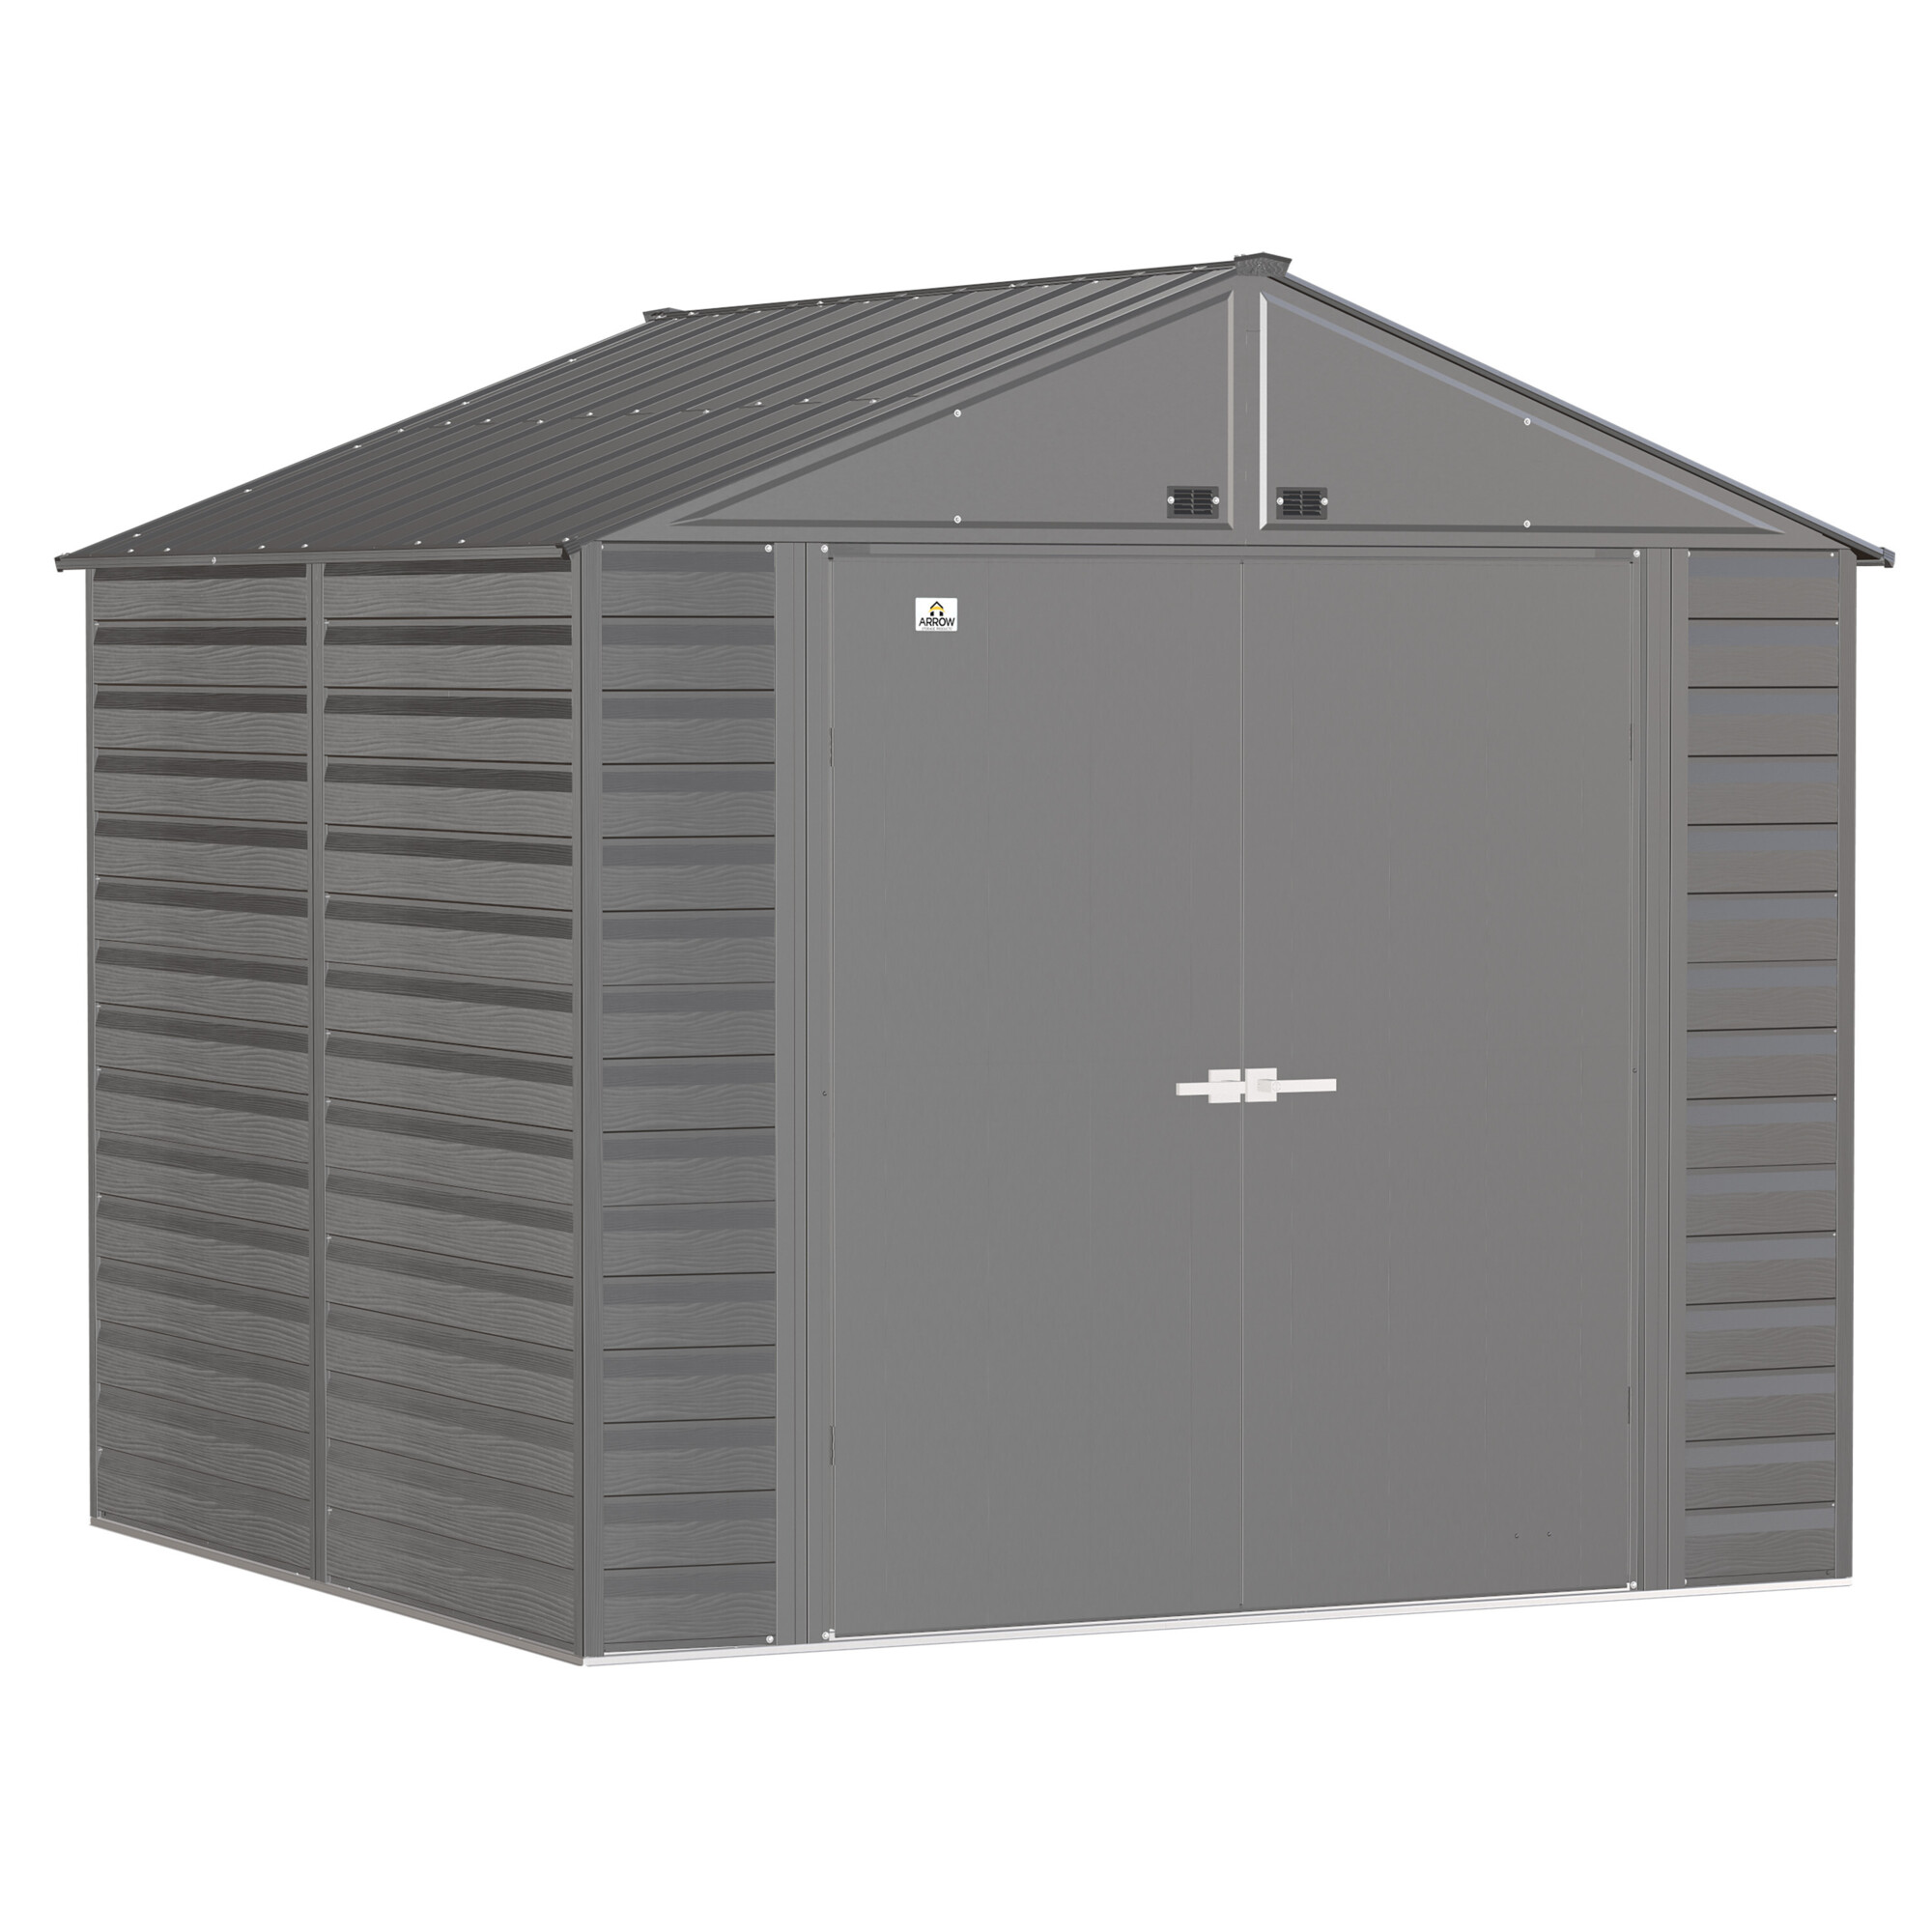 Arrow Storage Products, Select Steel Shed 8x8 Charcoal SCG88CC, Length 8 ft, Width 8 ft, Model SCG88CC